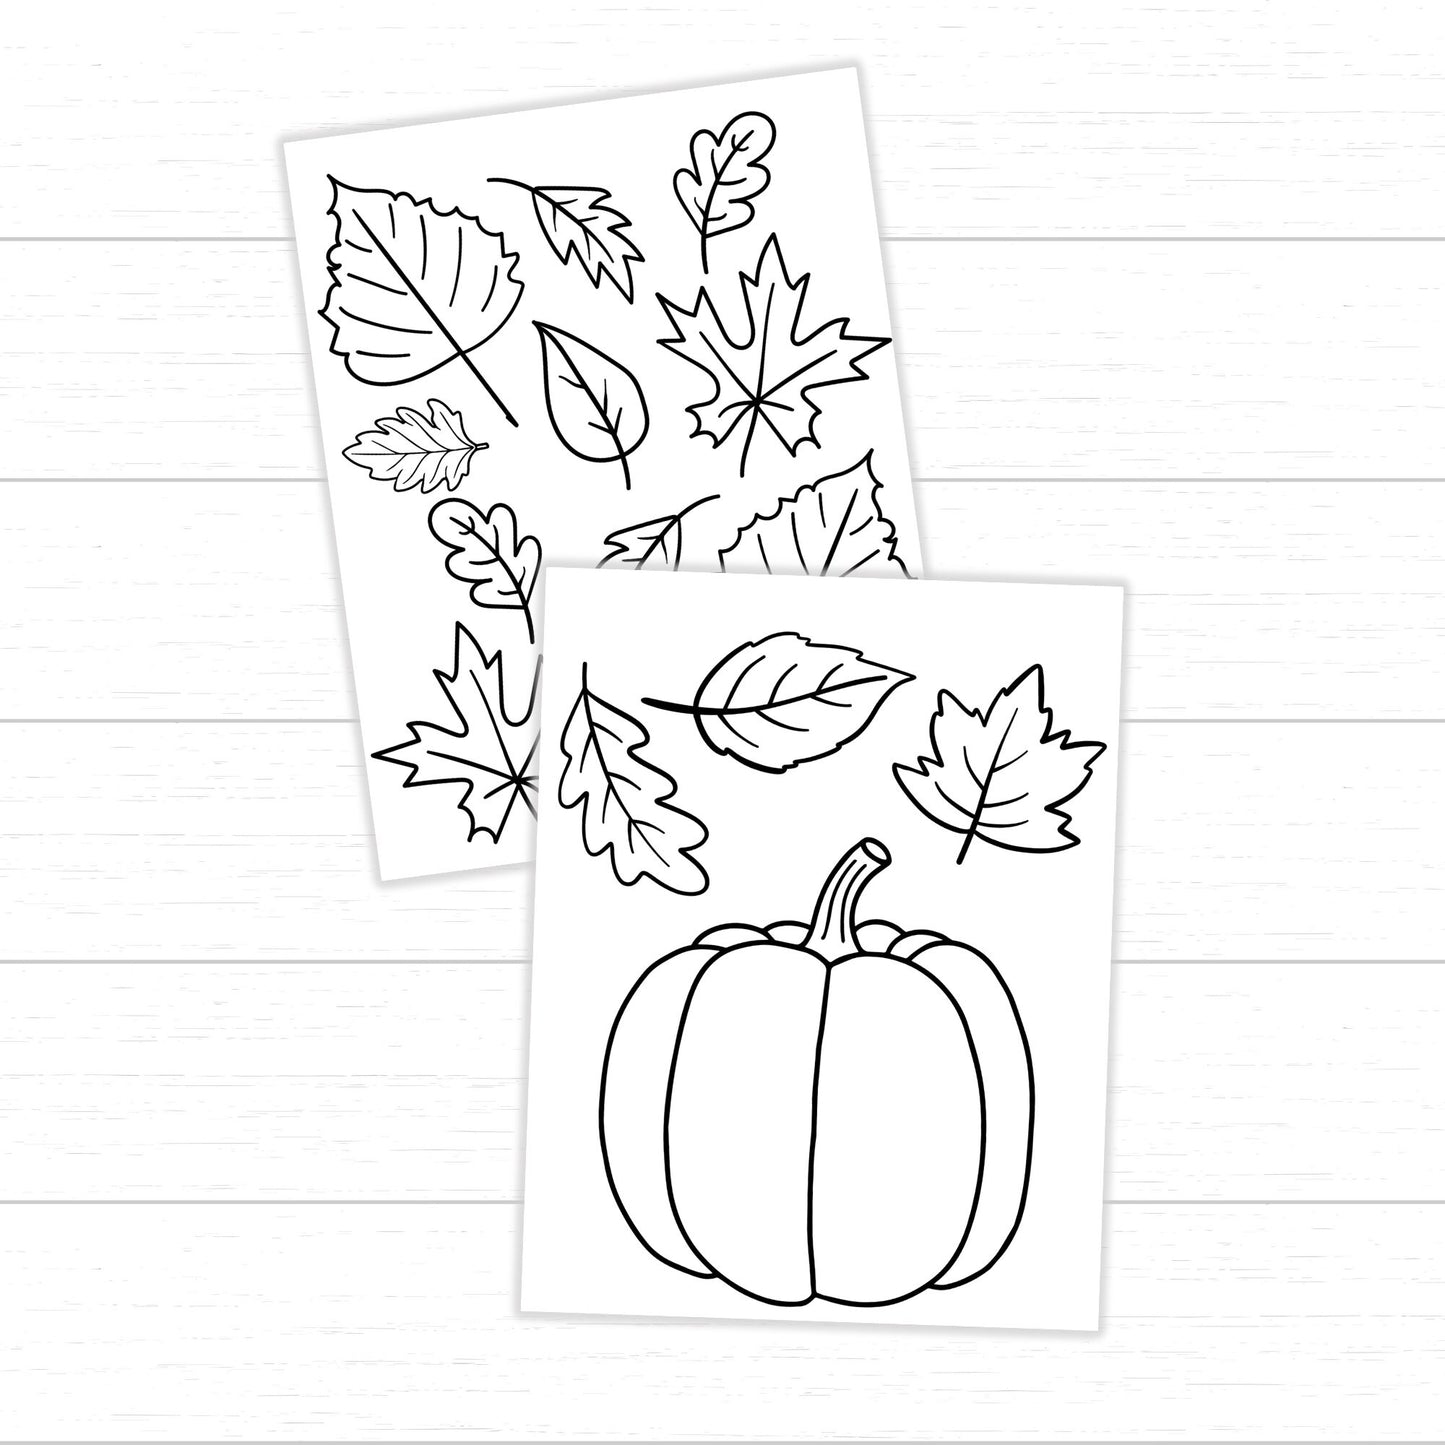 Fall Leaf Coloring Pages, Fall Leaf Activities, Fall Leaf Activity Pack, Fall Printables for Kids, Fall Worksheets, Leaf Activities for Fall